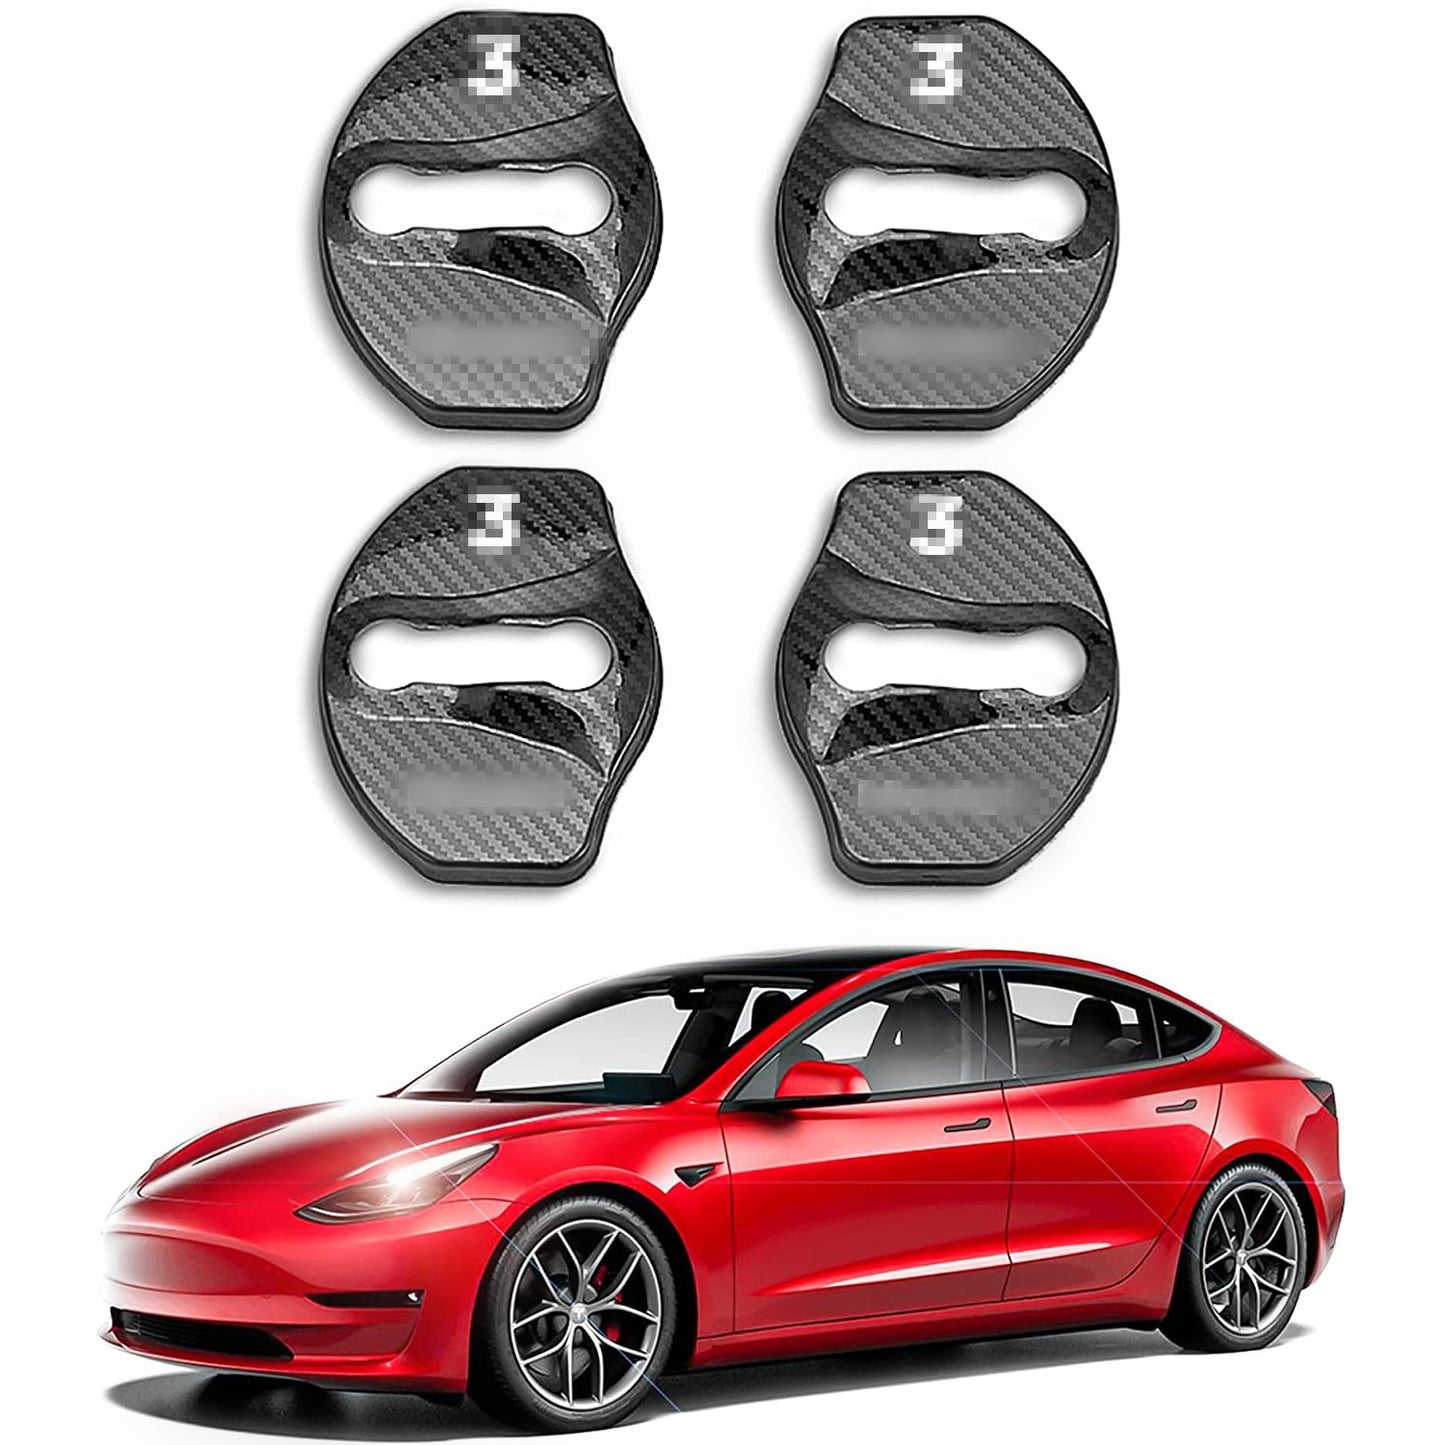 Door Lock Cover Protector Stainless Steel for Model 3/Y 4 Pcs(Carbon Fiber)